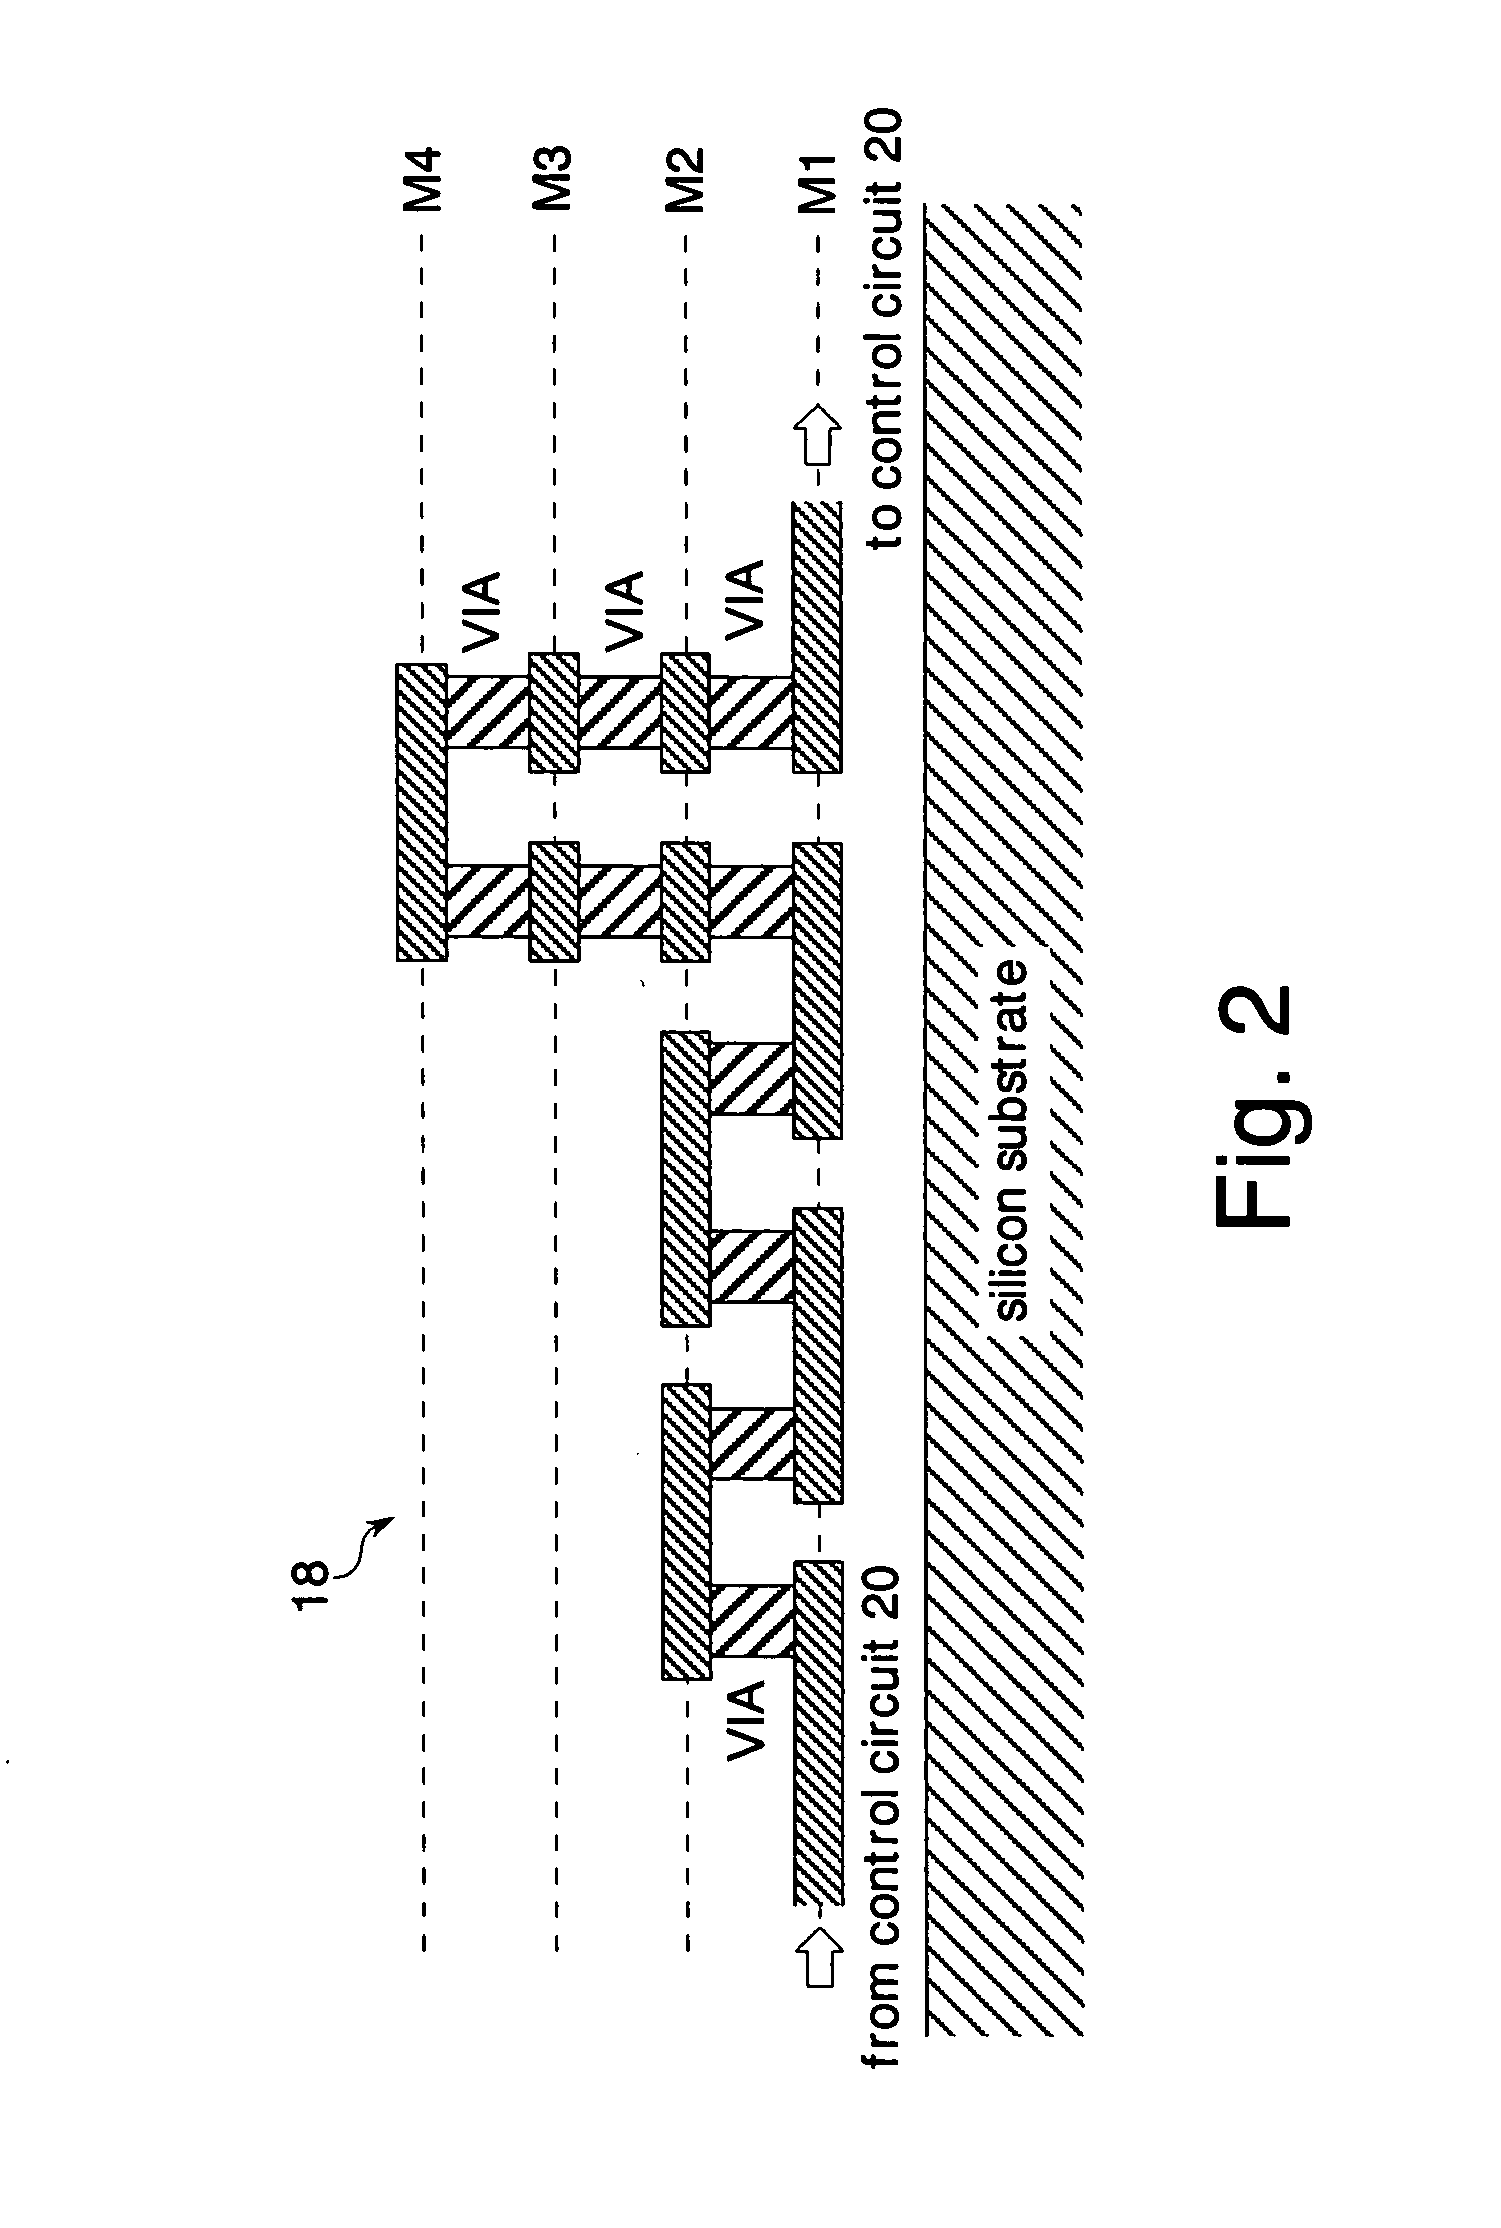 Semiconductor integrated circuit and evaluation method of wiring in the same